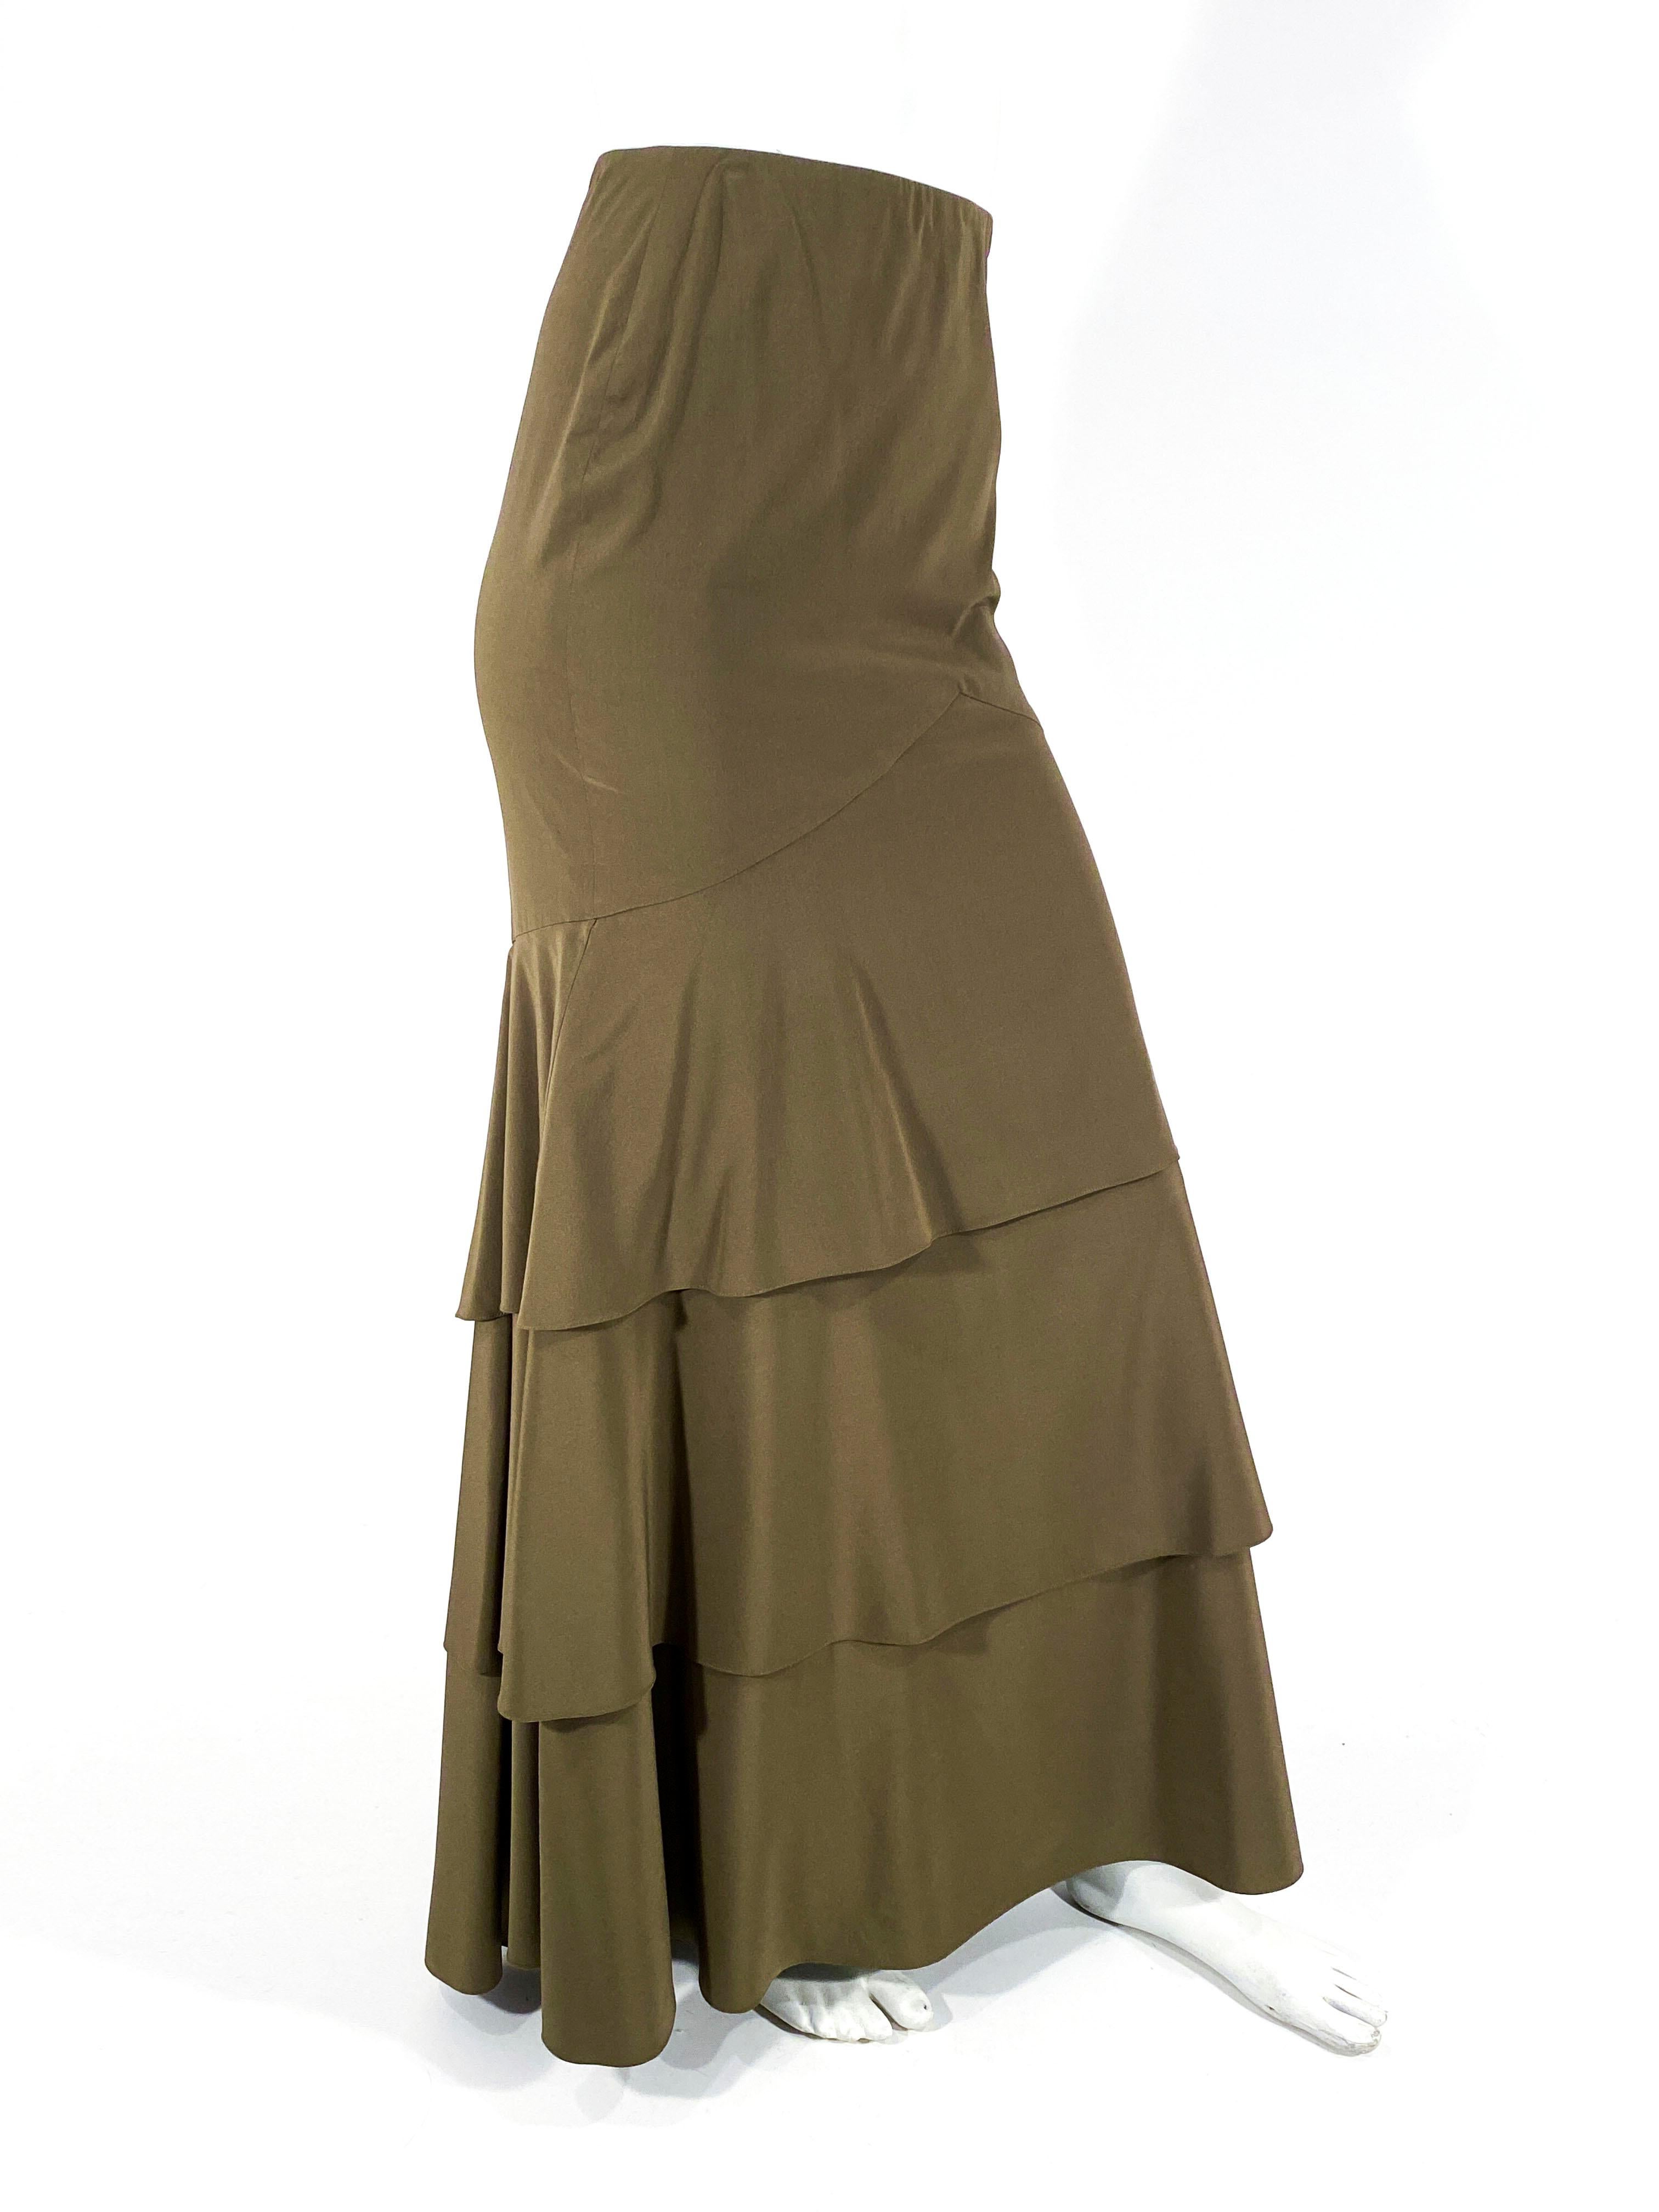 1990s Carolina Herrera Olive/brown silk mermaid skirt with multi-tiers down the hem of the skirt. The back has an elongated fishtail from the hip down. The hip is fitted for a flattering silhouette. The back has a hidden zipper closure on the clean